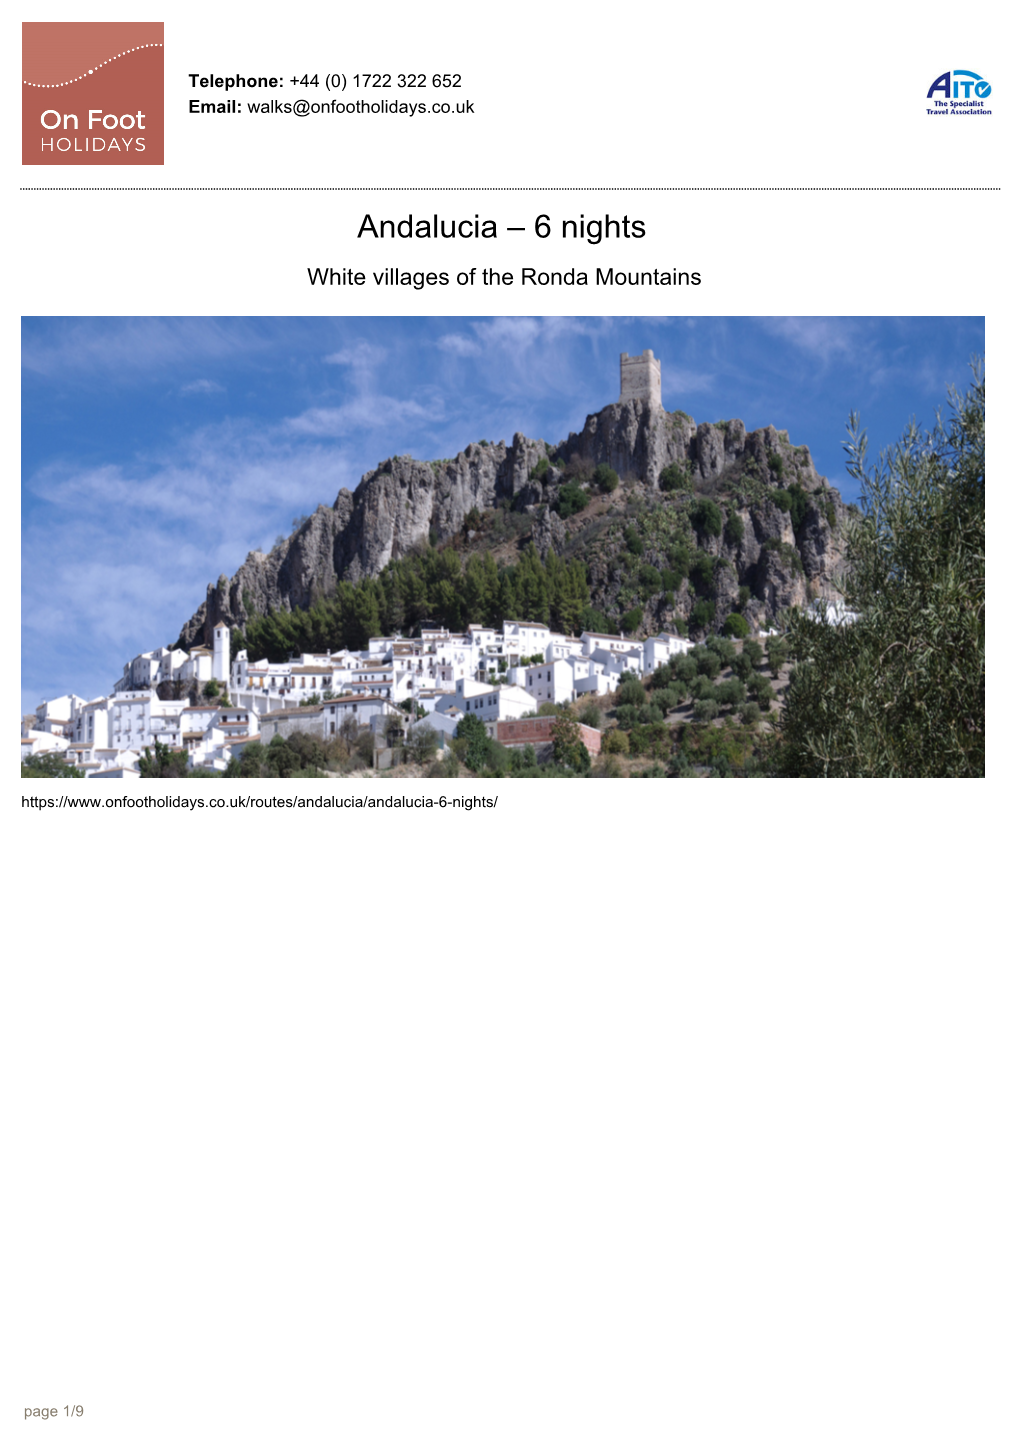 Andalucia – 6 Nights White Villages of the Ronda Mountains